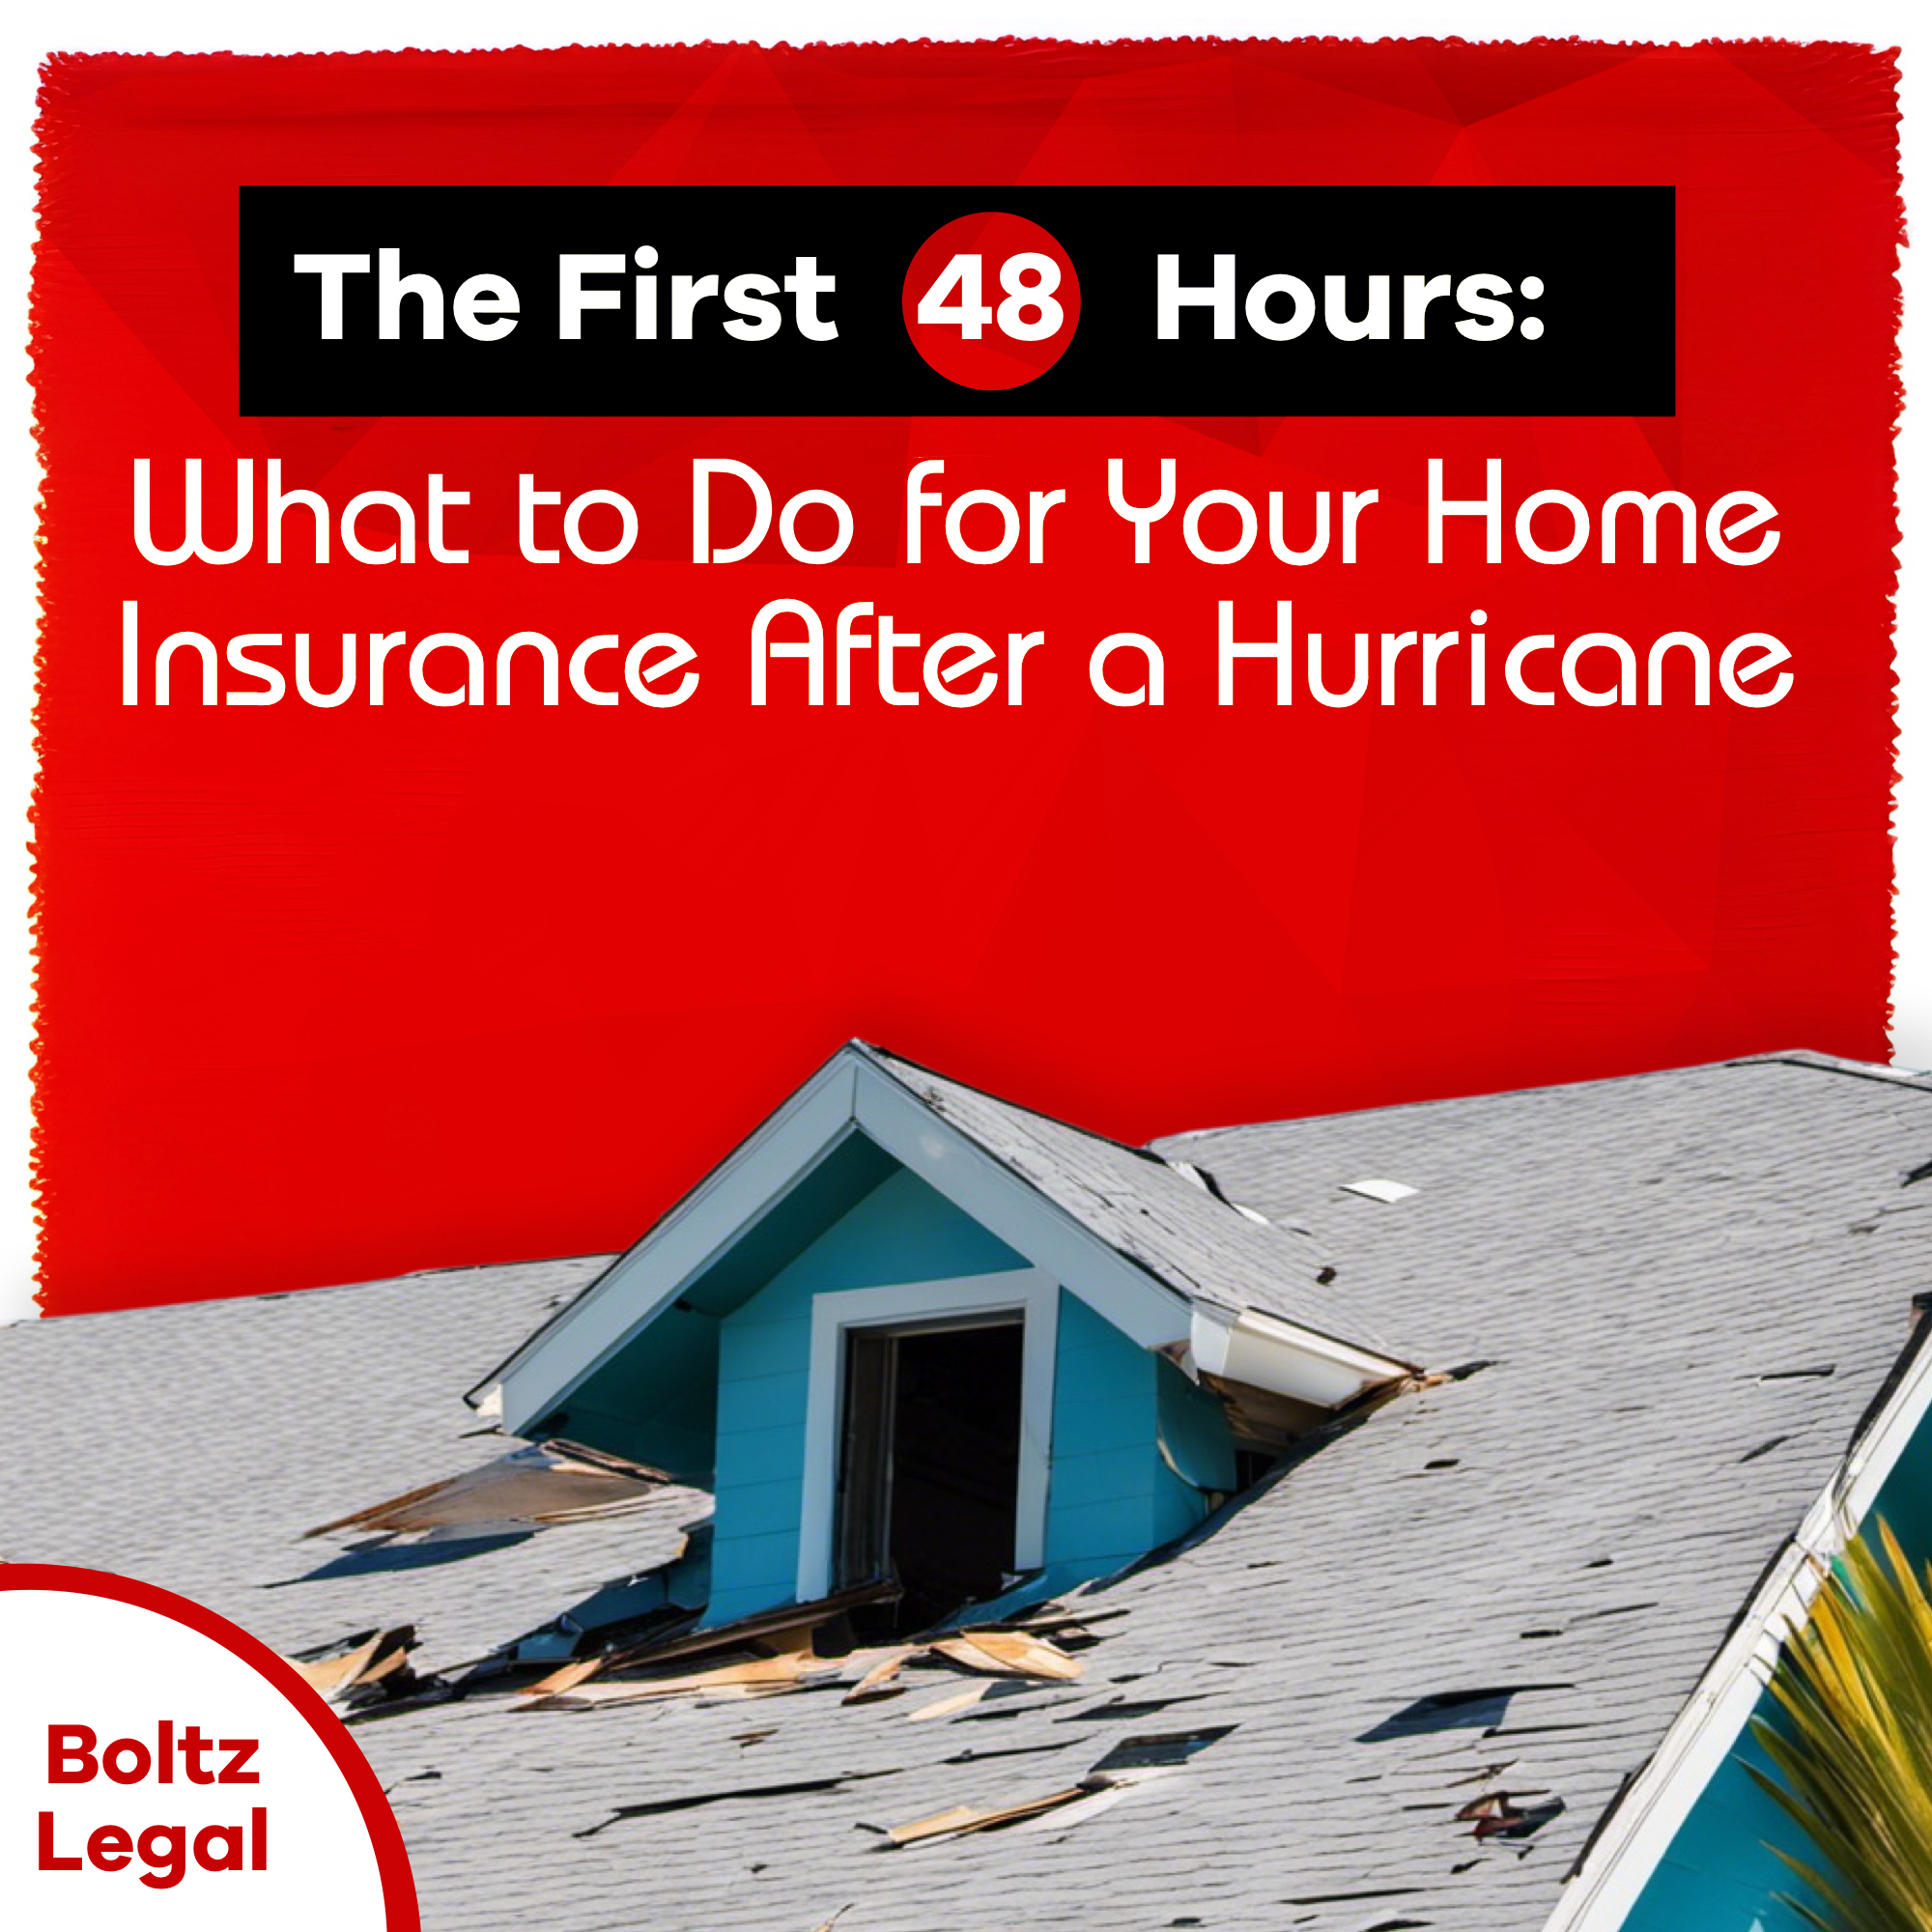 The First 48 Hours What to Do for Your Home Insurance After a Hurricane